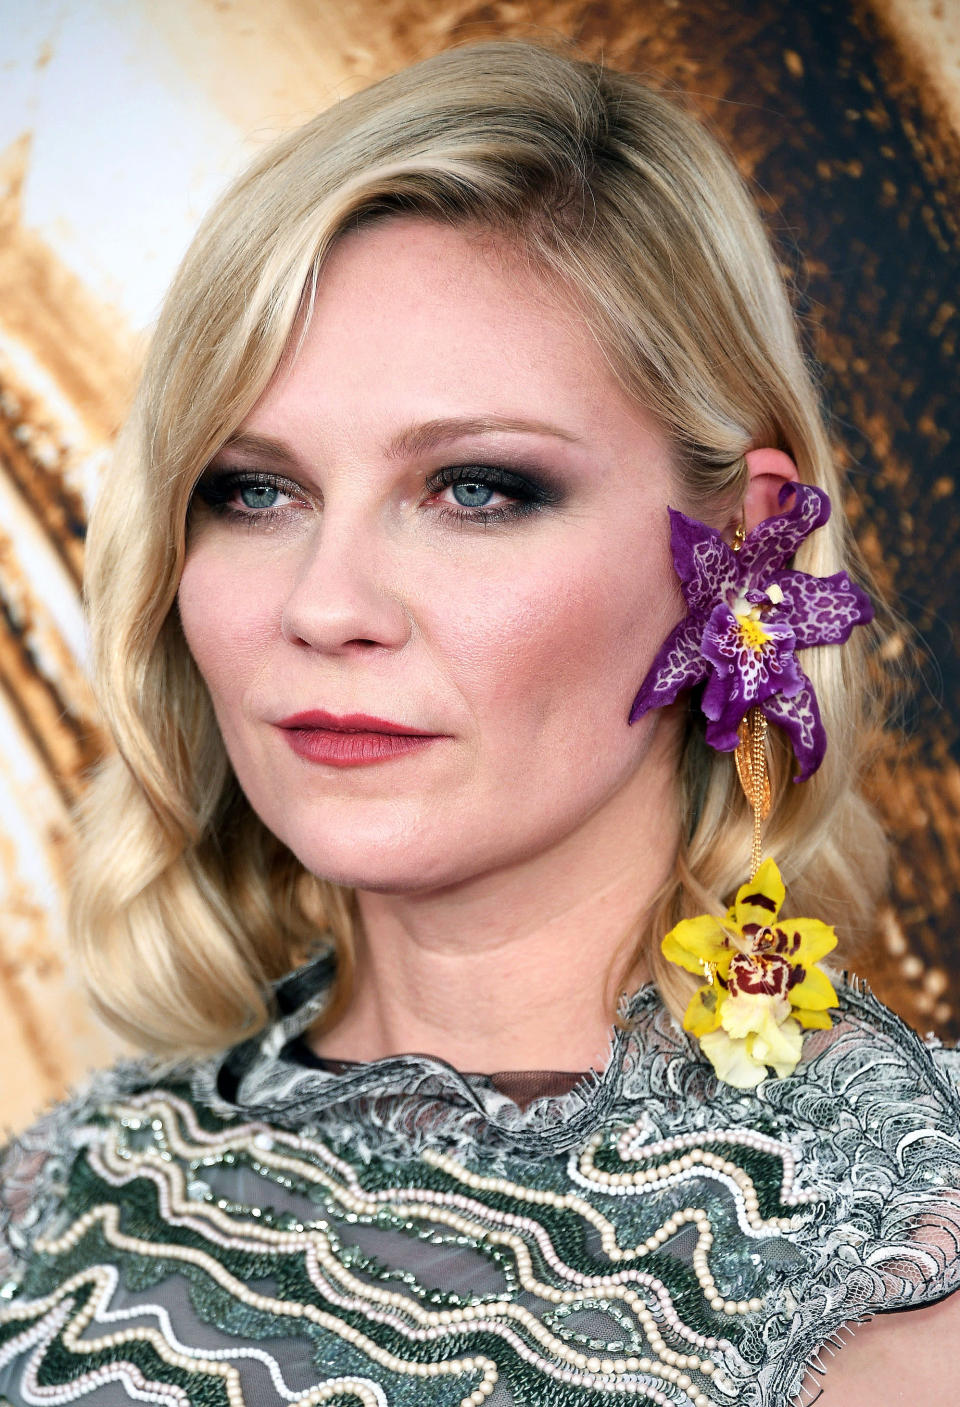 Kirsten Dunst wore actual orchids as her earrings at the CFDA Fashion Awards 2016 on June 6 in NYC — see her floral-inspired red carpet style